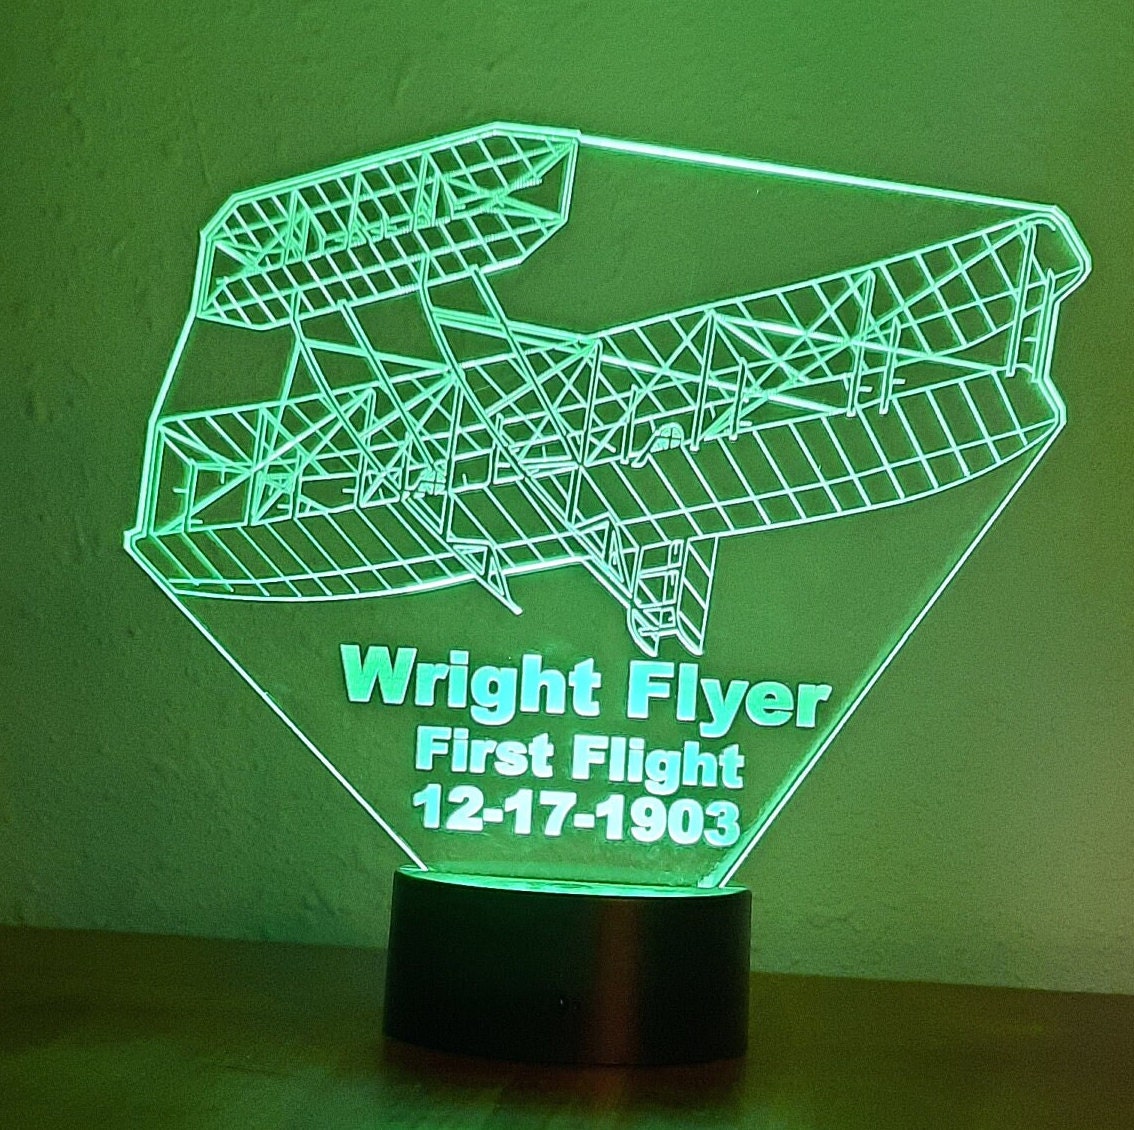 Awesome "First Flight - The Wright Flyer" 3D LED Lamp (1289) - Free Shipping